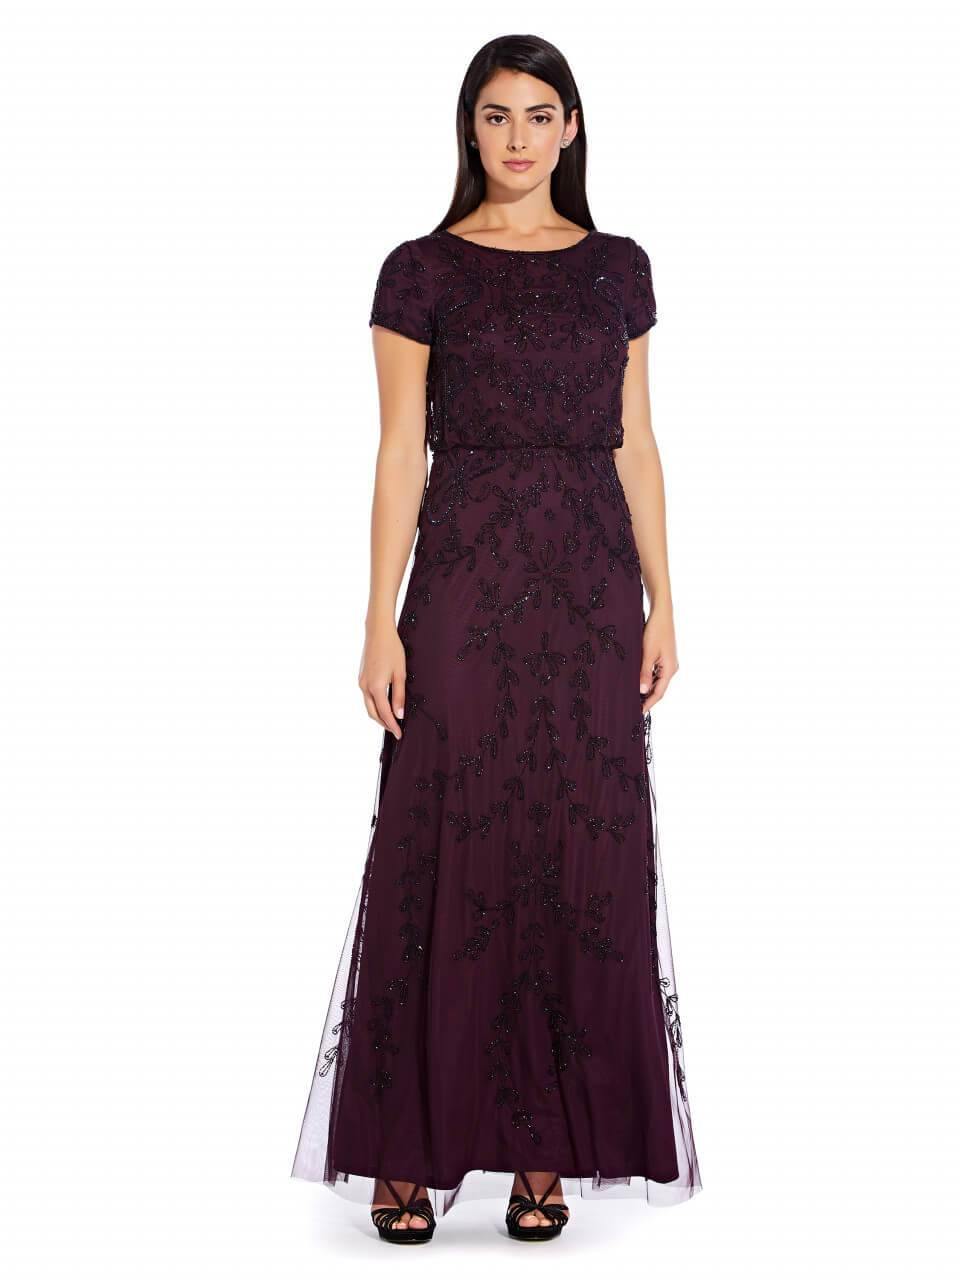 Adrianna Papell Mother of the Bride Long Dress Formal - The Dress Outlet Adrianna Papell